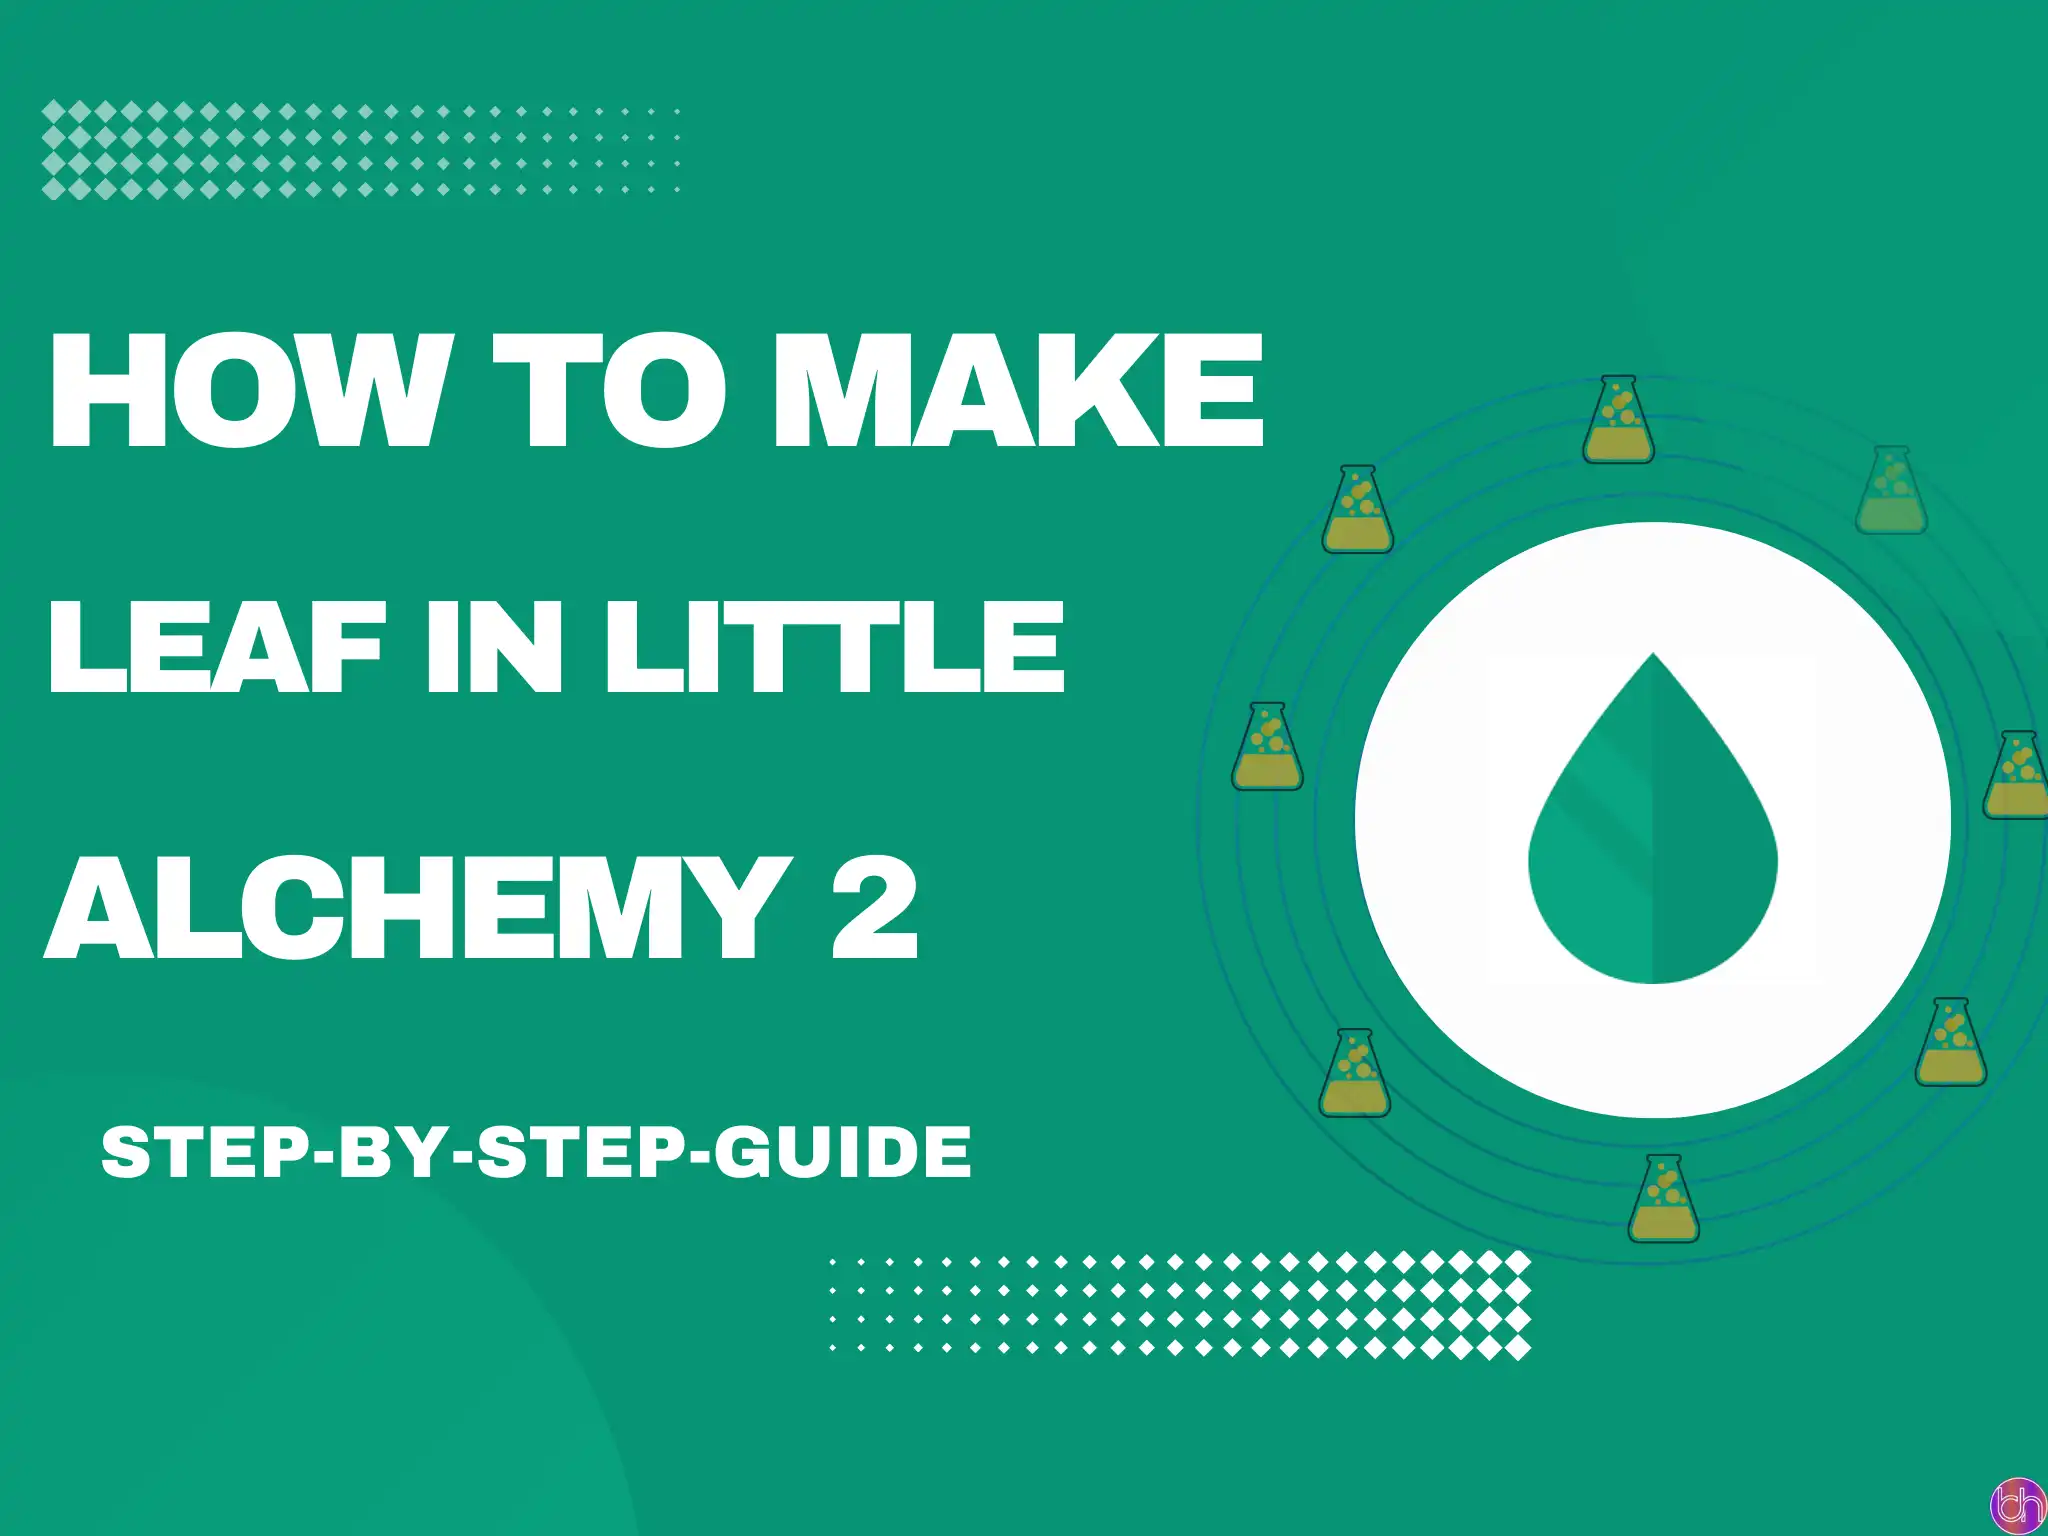 How to make Leaf in little alchemy 2